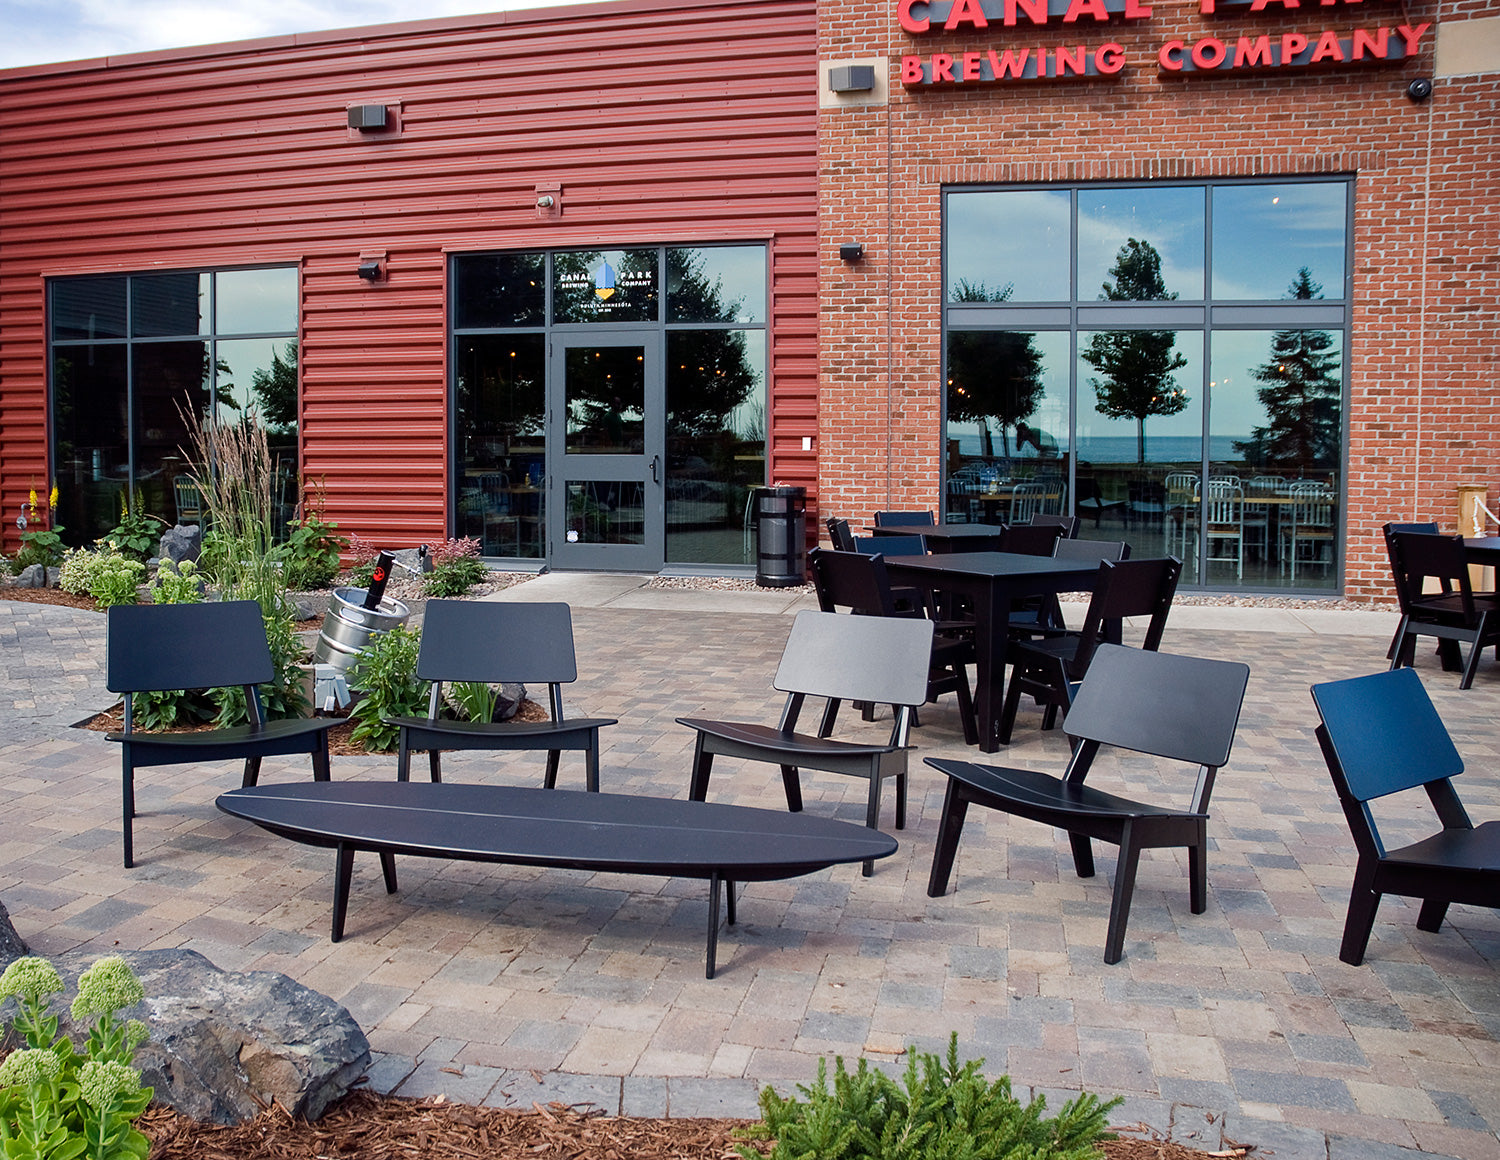 Featured Project: How Loll outdoor furniture creates the ideal atmosphere at Canal Park Brewing Co.